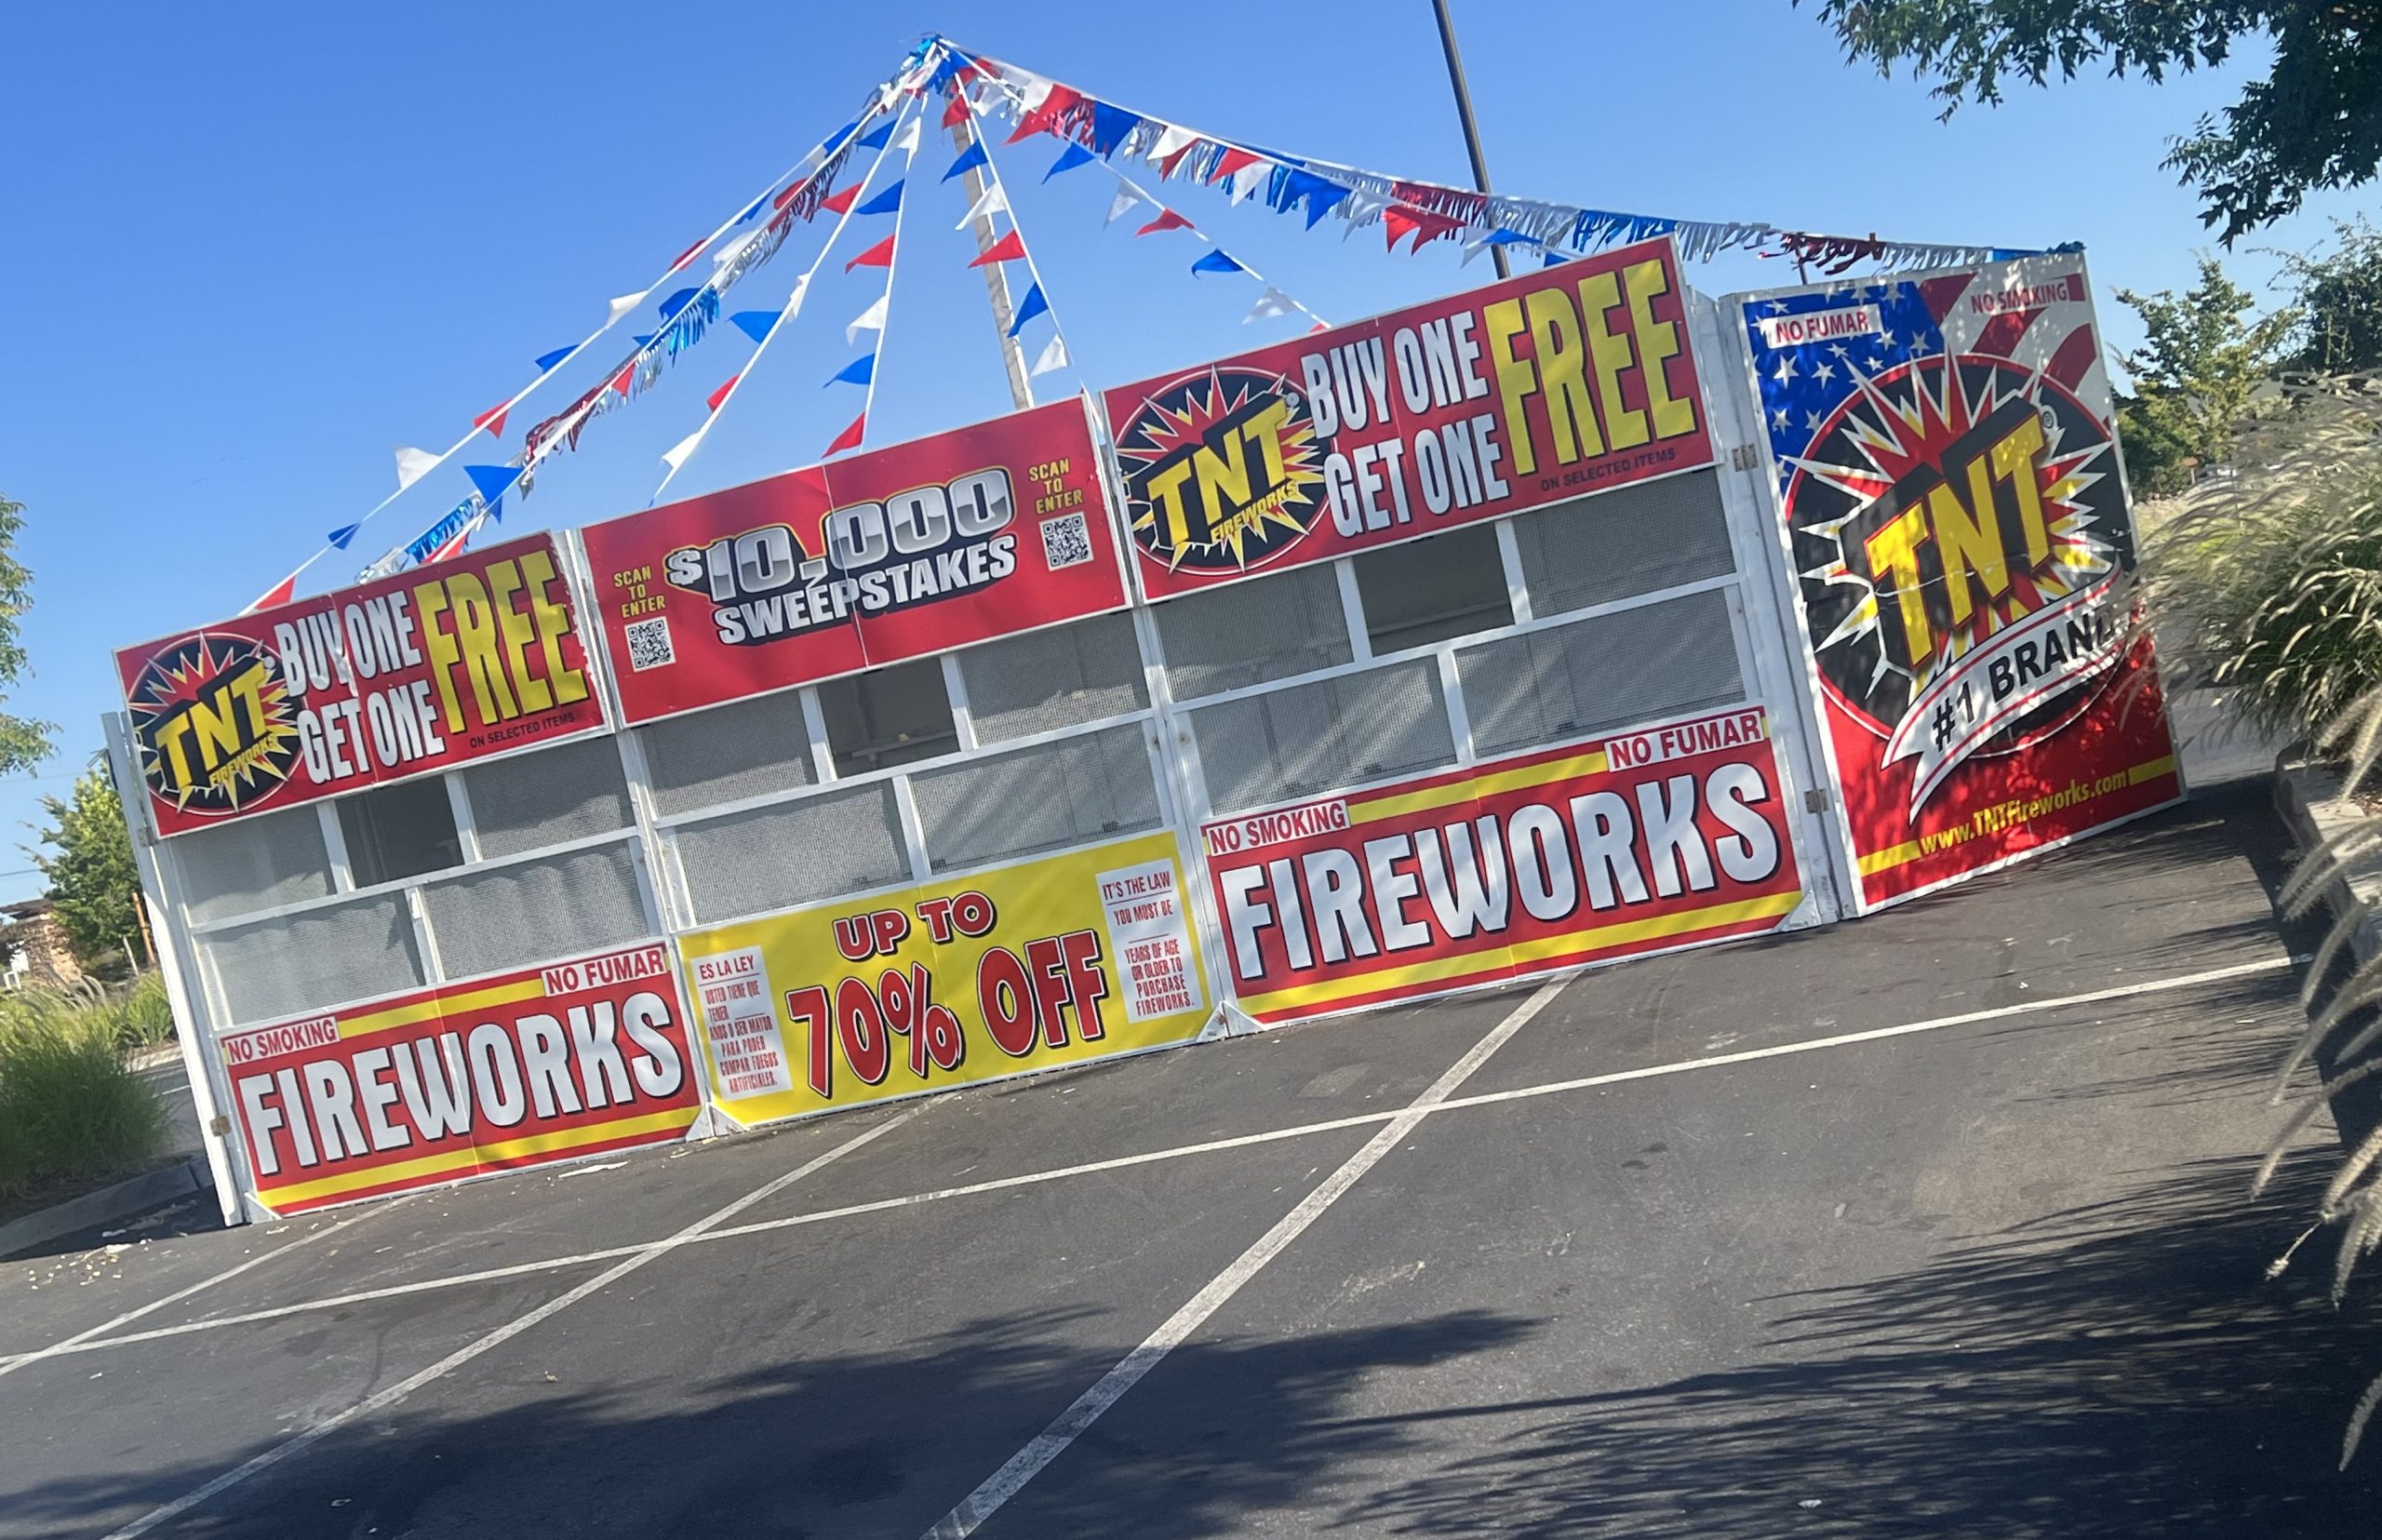 14 local non-profits to begin fireworks sales Wednesday